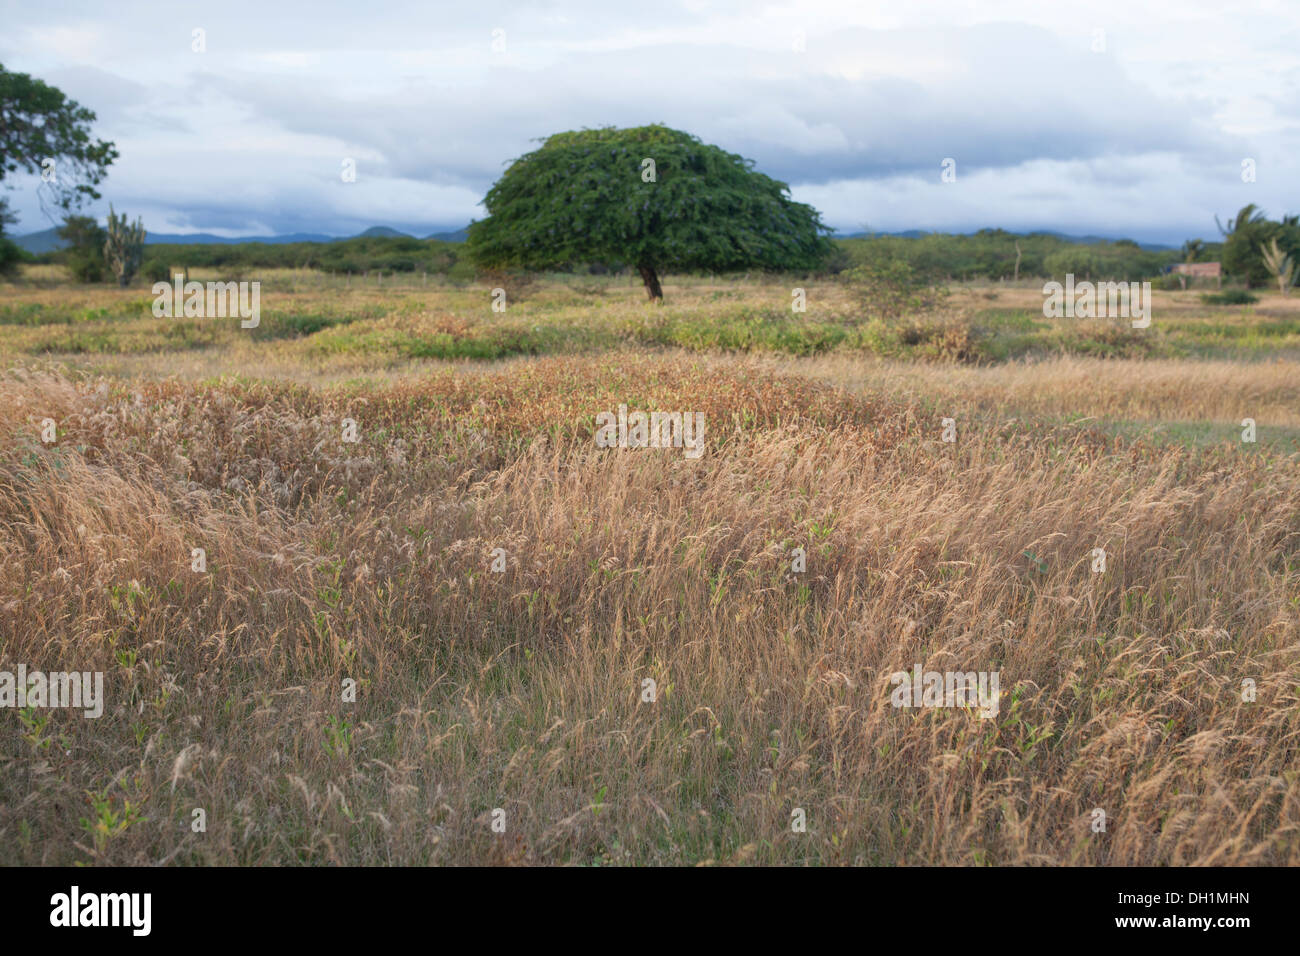 A beautiful nature scene in the Istmo region of the state of Oaxaca, with a tree and grass blowing in the wind. Stock Photo